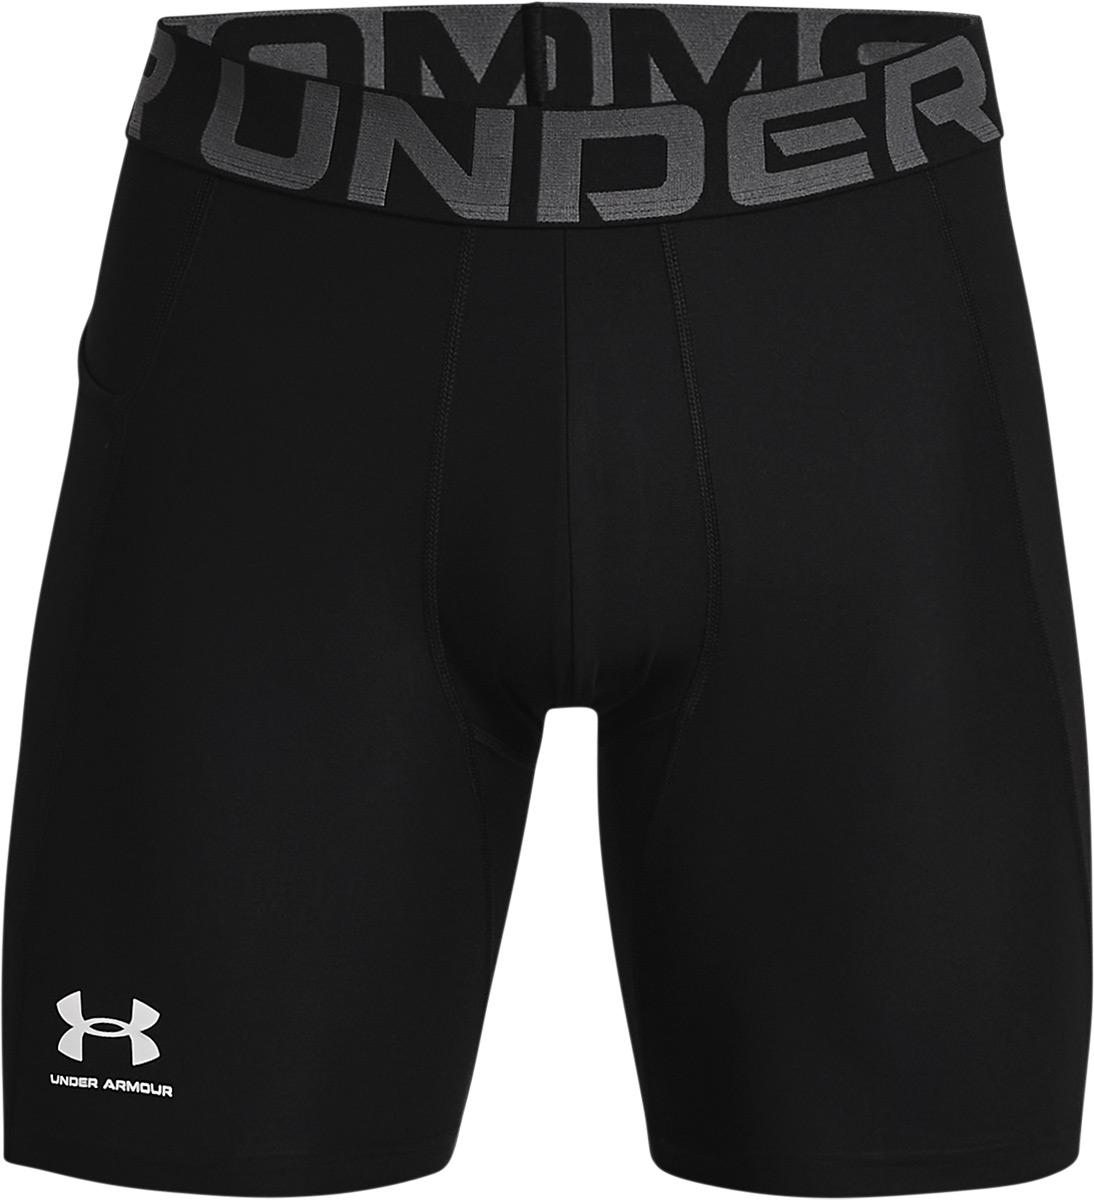 Under Armour Heatgear Armour Compression Shorts - Black/pitch Gray